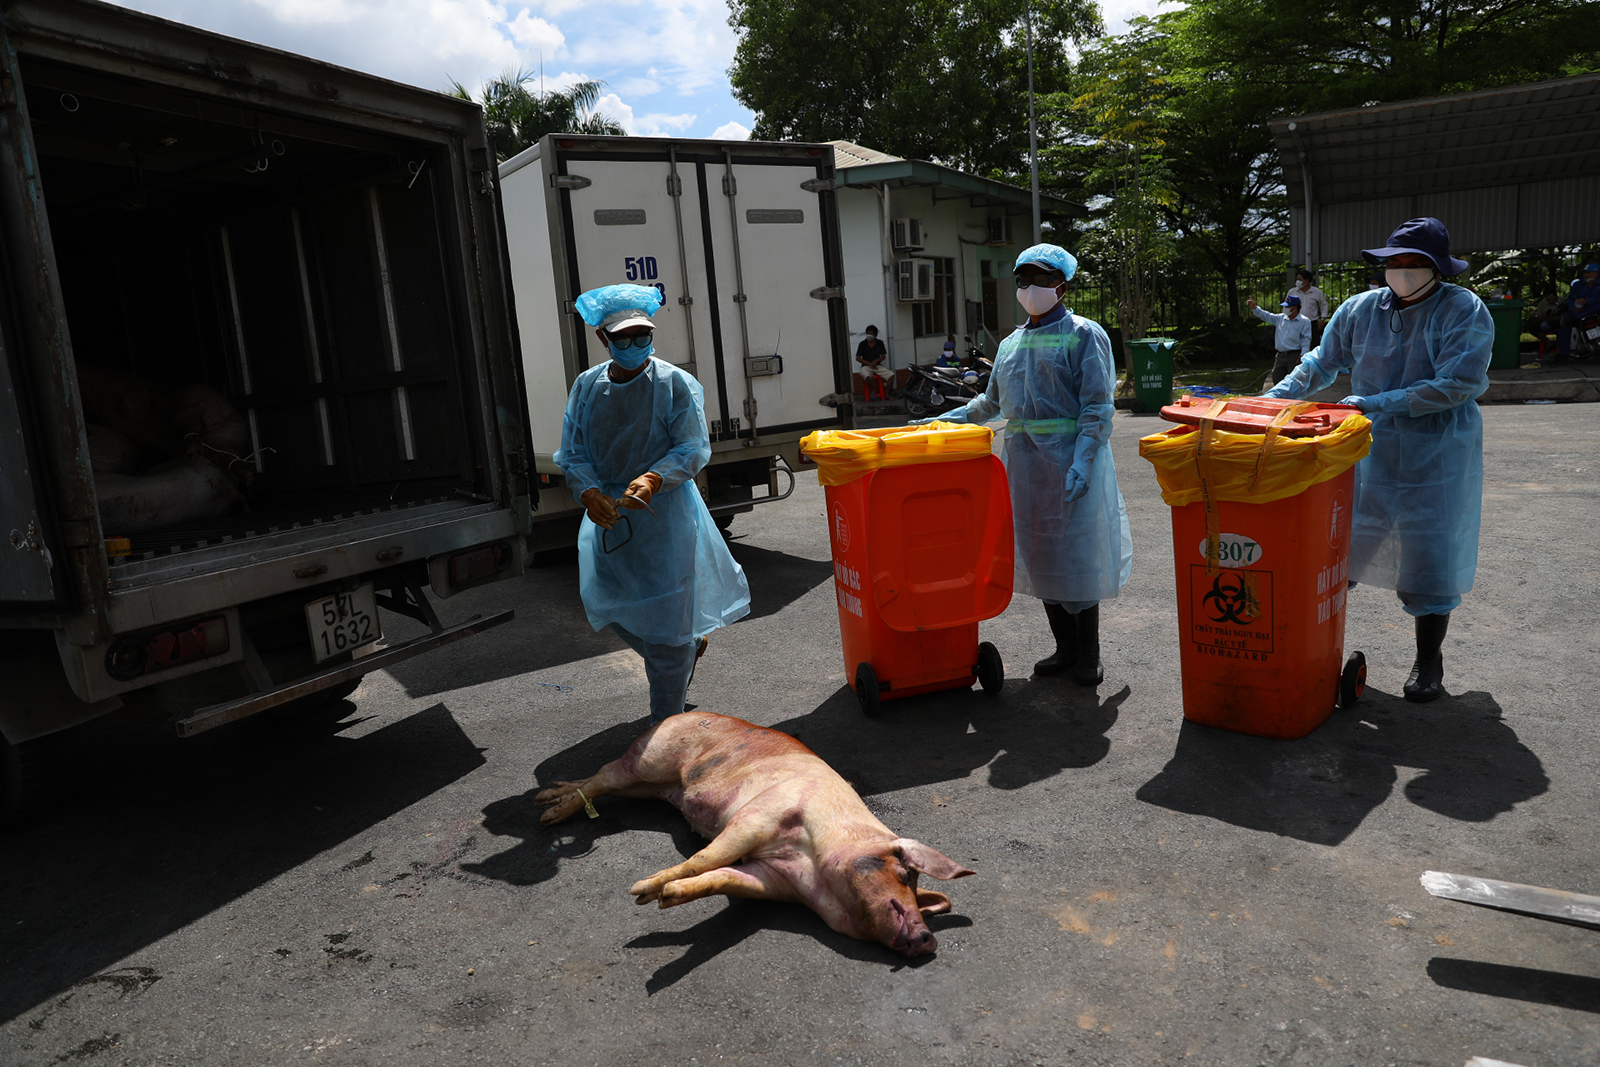 A pig is moved from a truck to the incinerator. Photo: Tuoi Tre